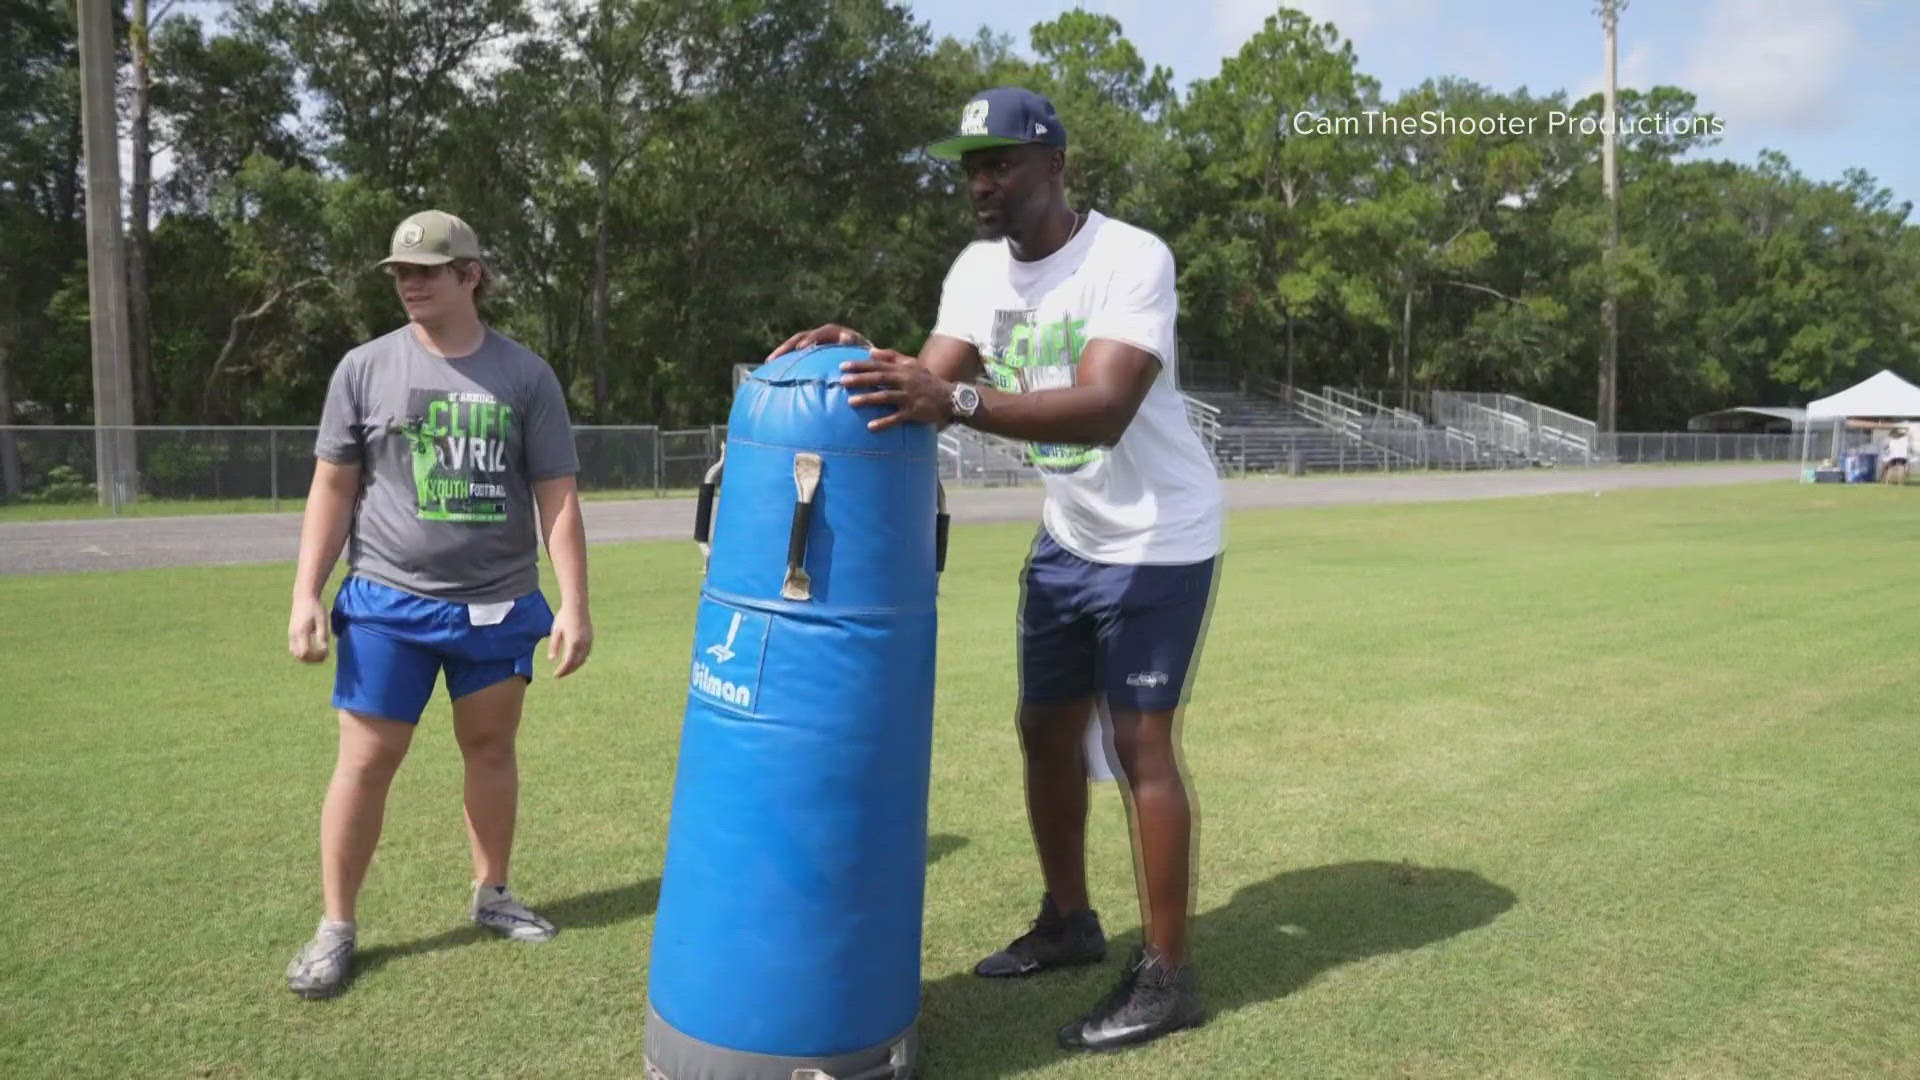 Read more about Avril here: https://www.firstcoastnews.com/article/news/local/super-bowl-champion-cliff-avril-is-awarding-scholarships-to-two-high-school-seniors-